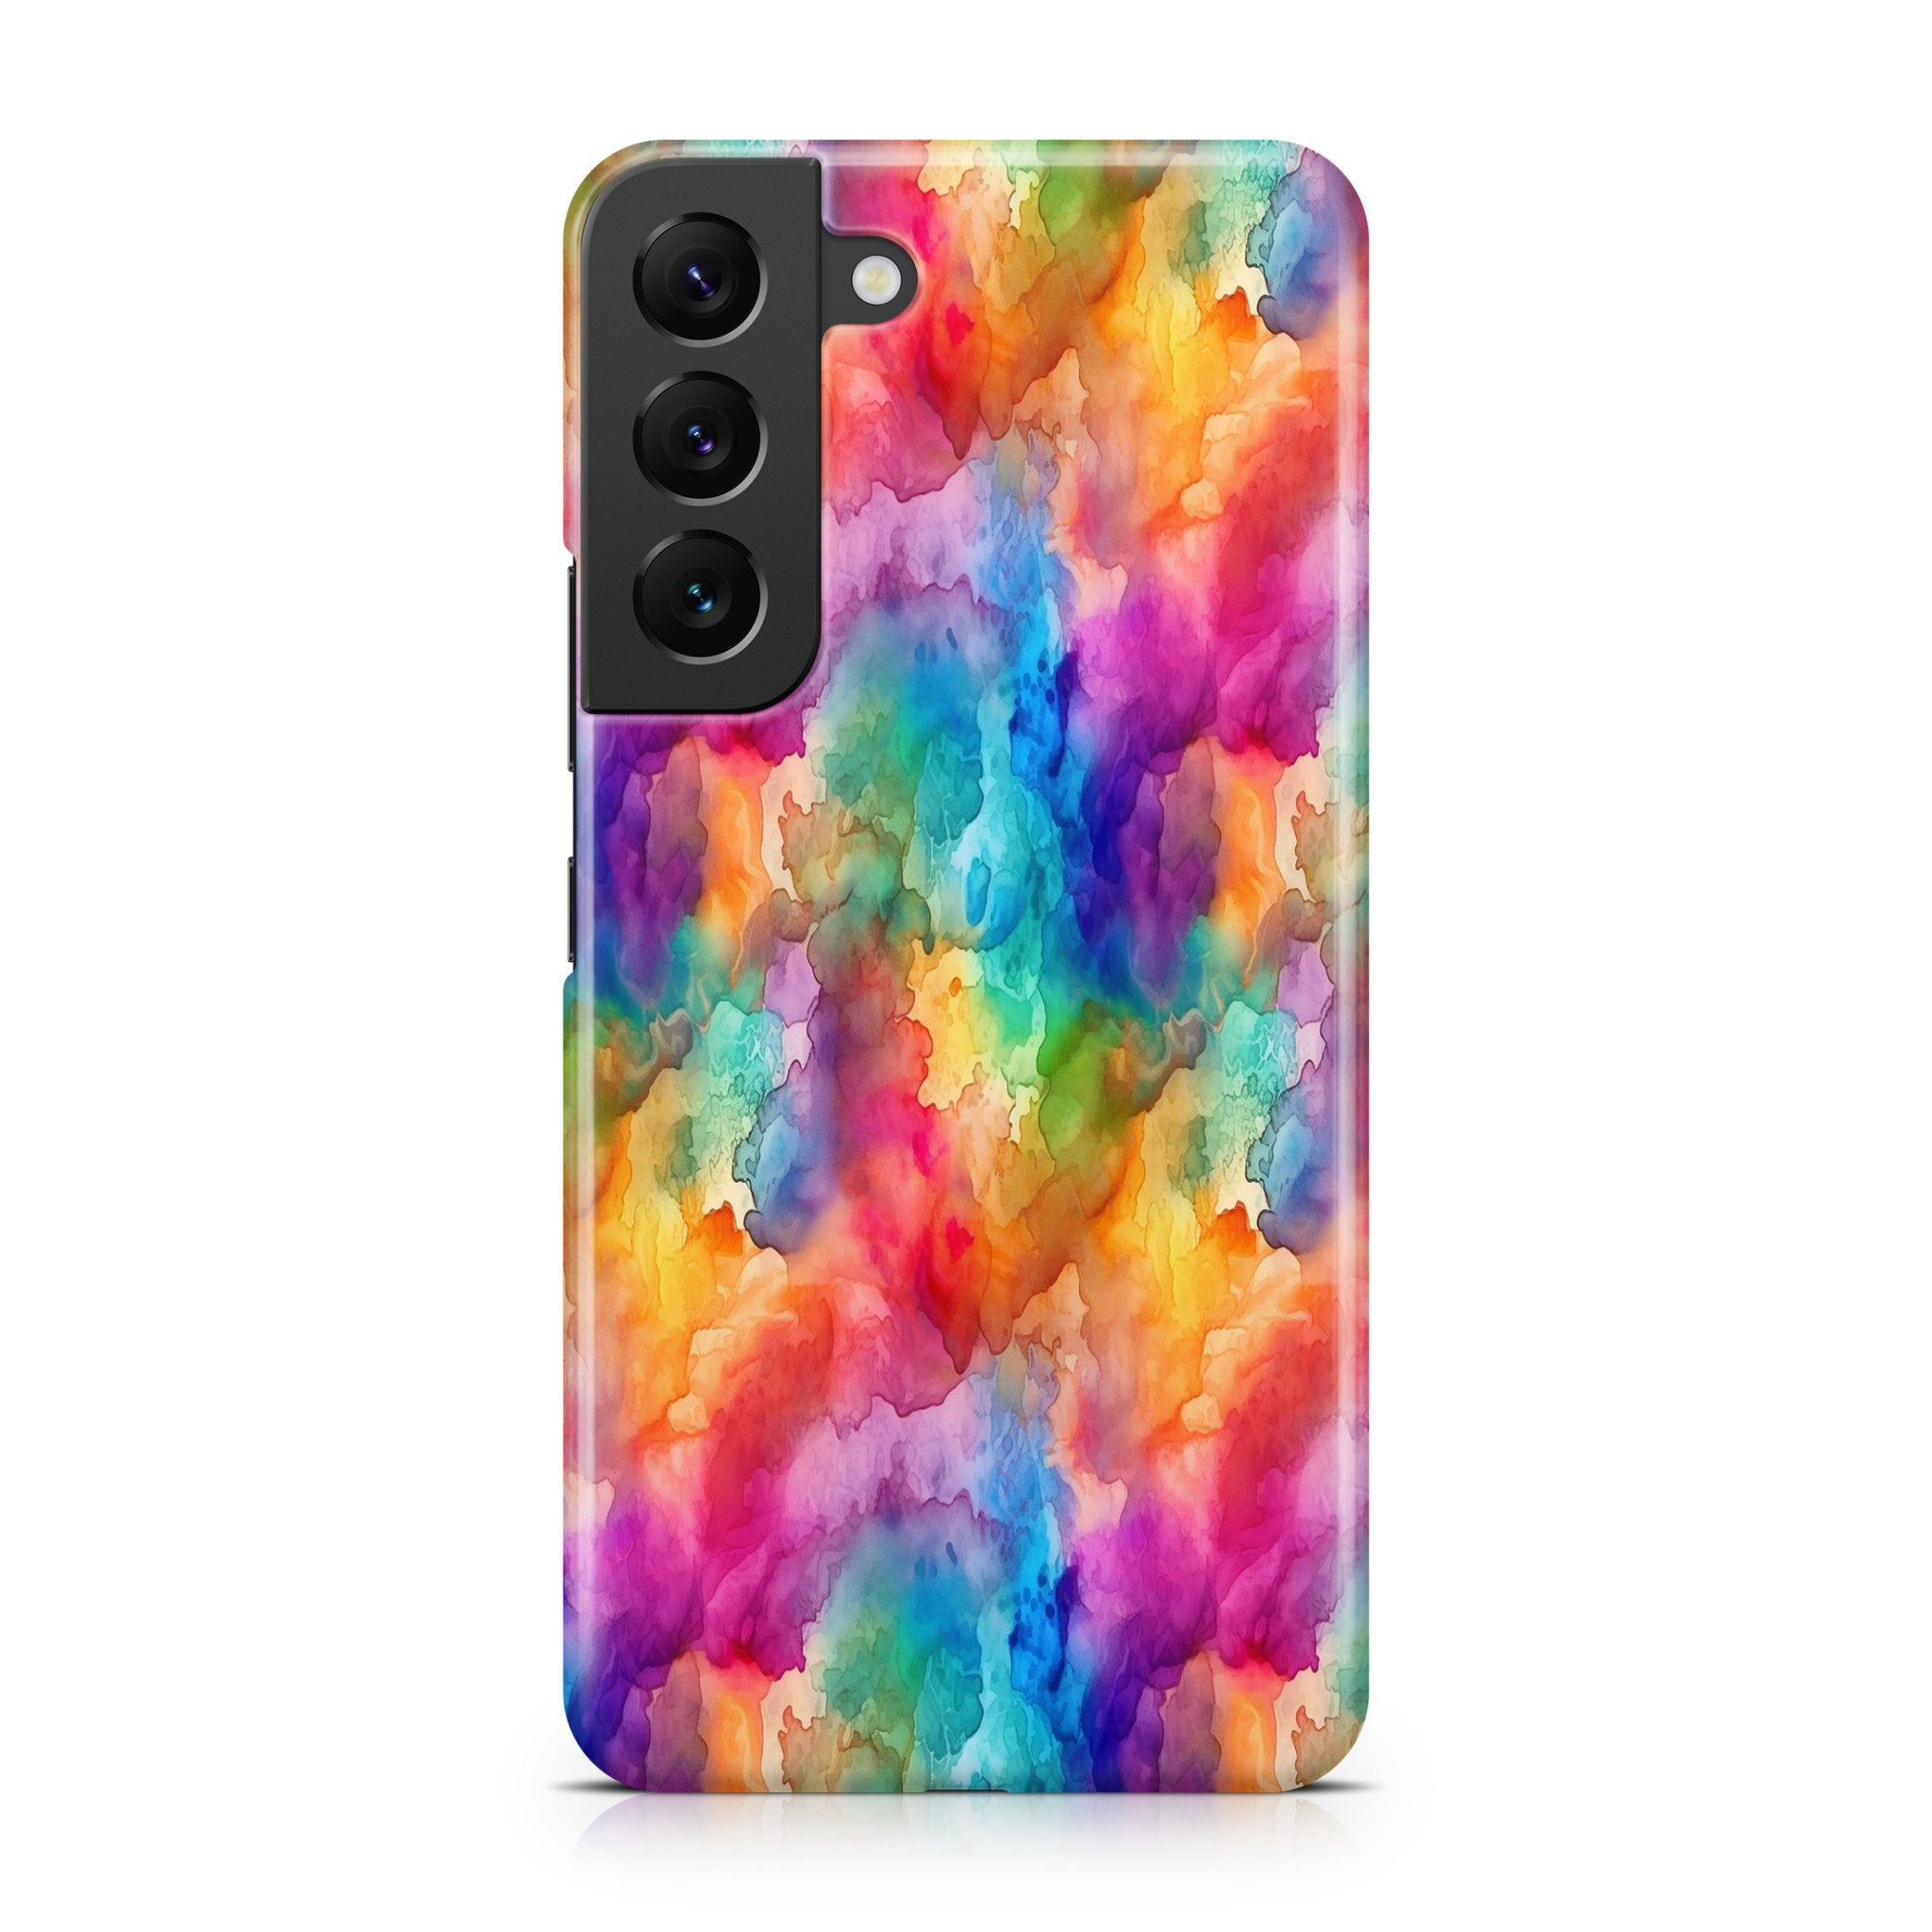 Colorful Mind - Samsung phone case designs by CaseSwagger